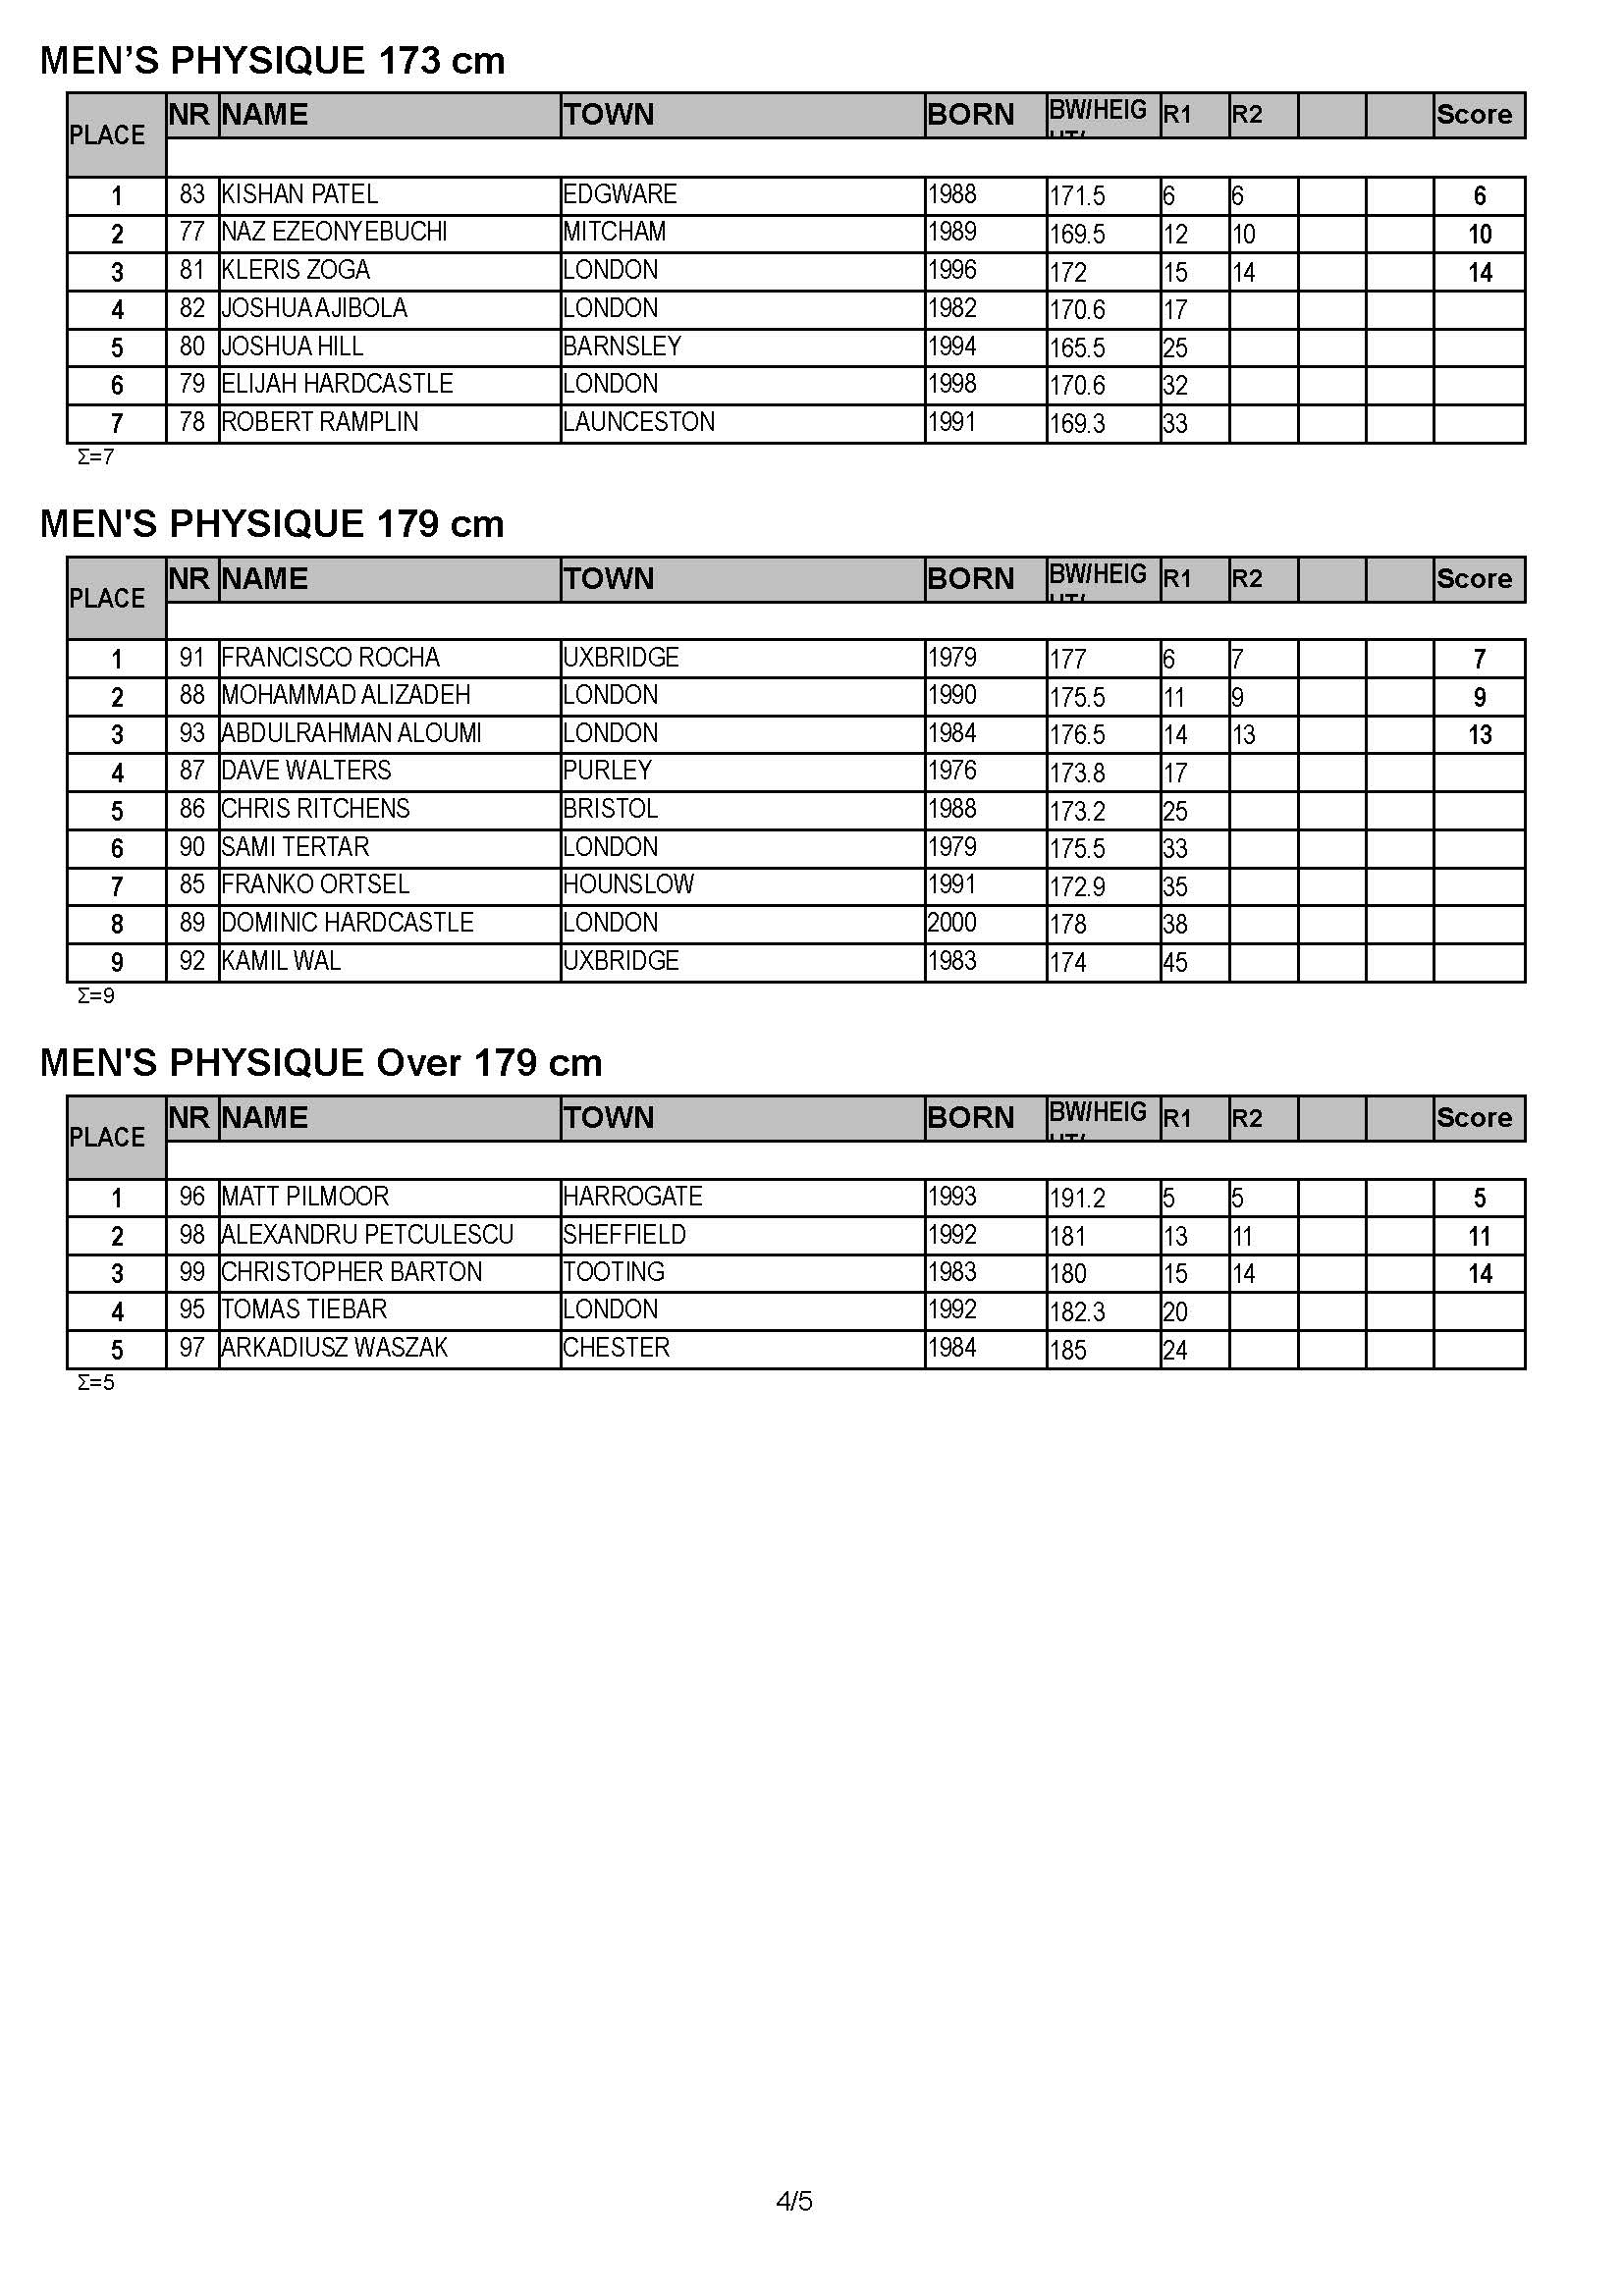 2019 UK NATIONALS RESULTS_Page_4.jpg